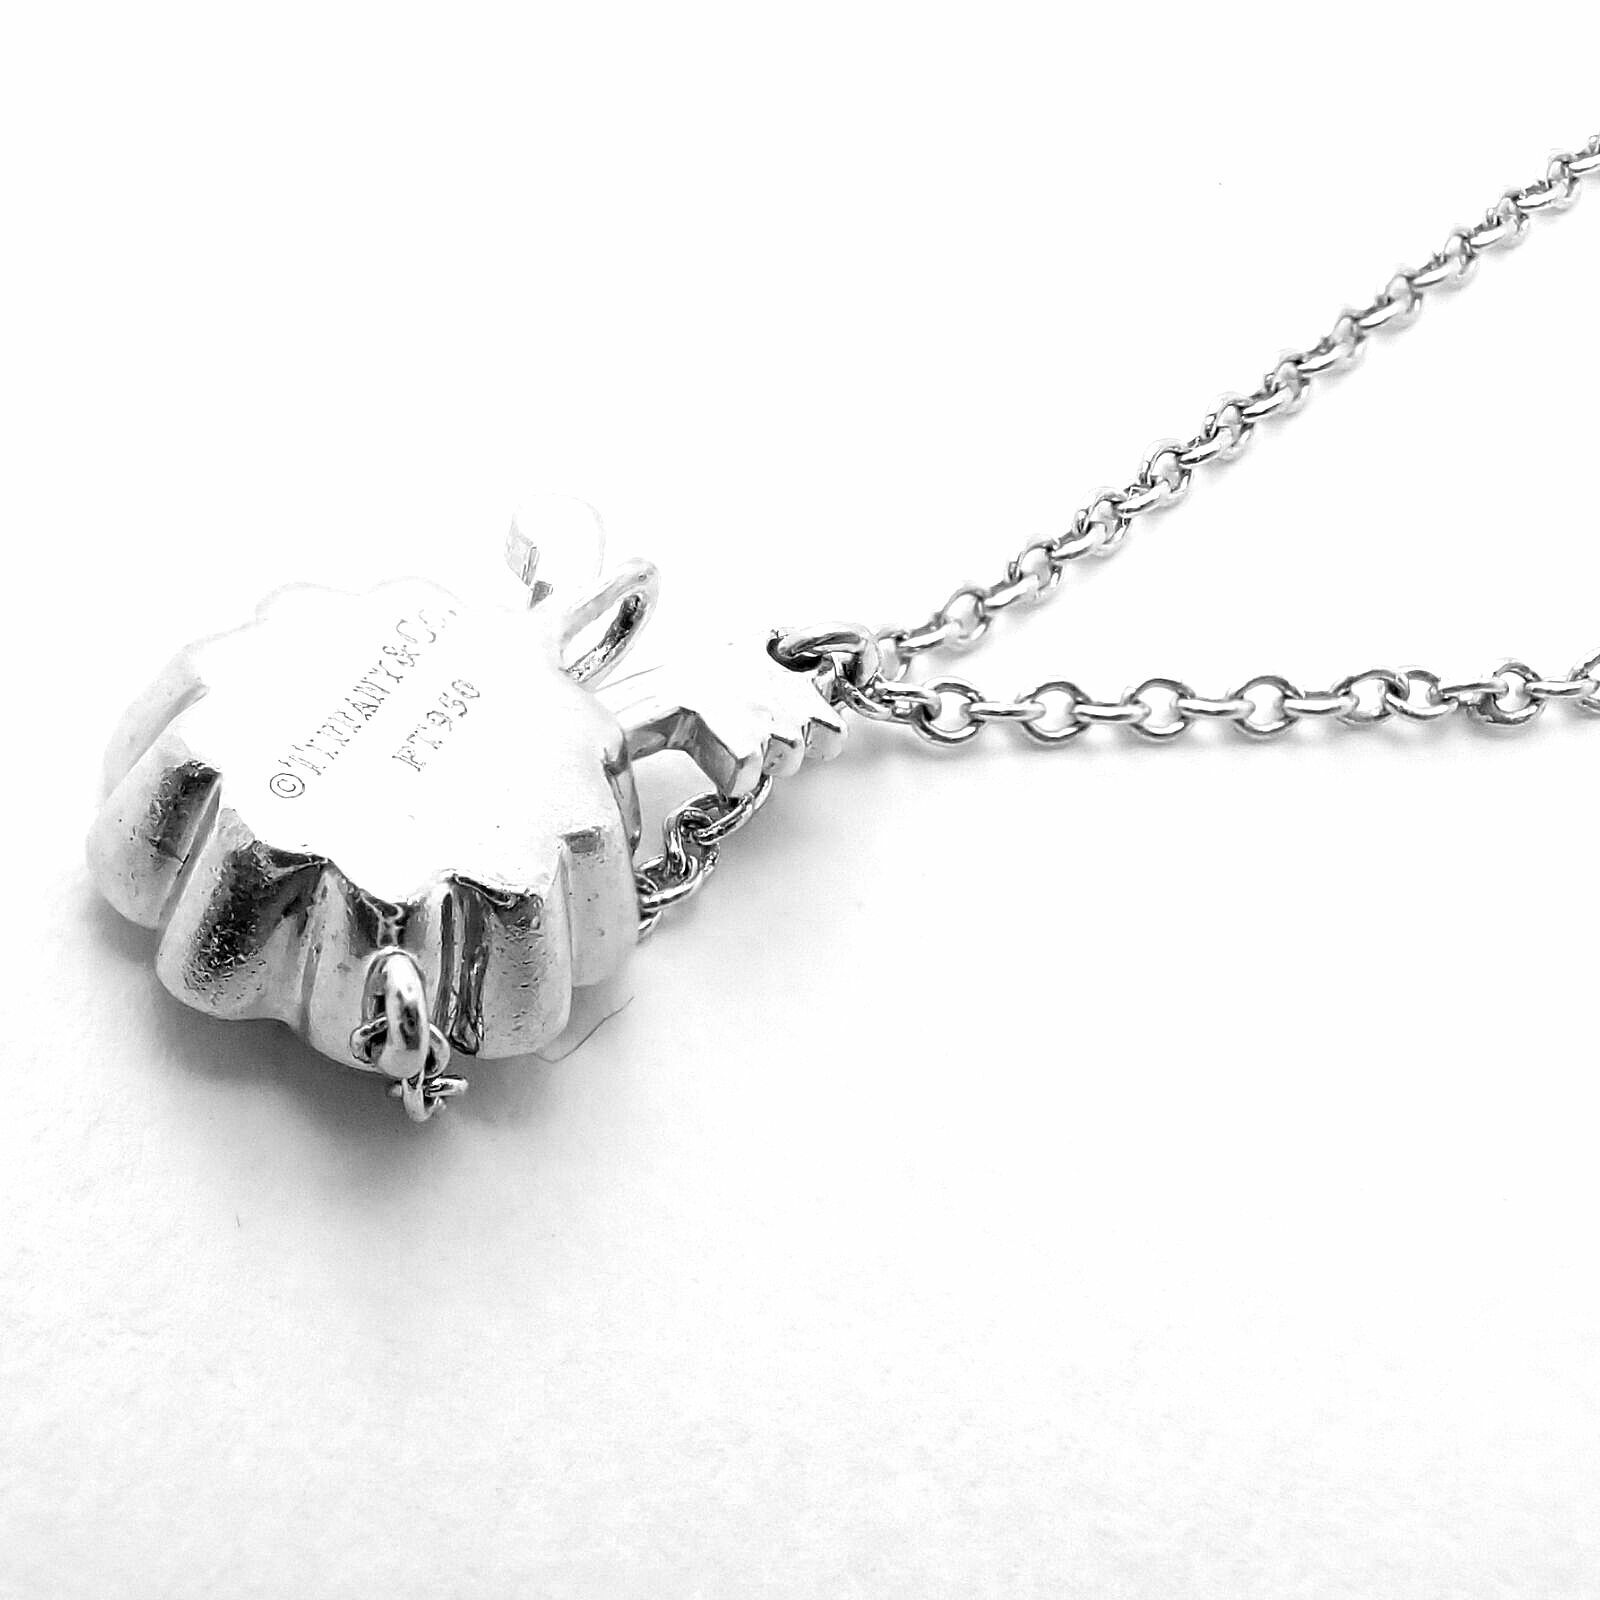 Tiffany & Co. Jewelry & Watches:Fine Jewelry:Necklaces & Pendants Authentic! Tiffany & Co Platinum Diamond Large Daisy Flower Pendant Necklace